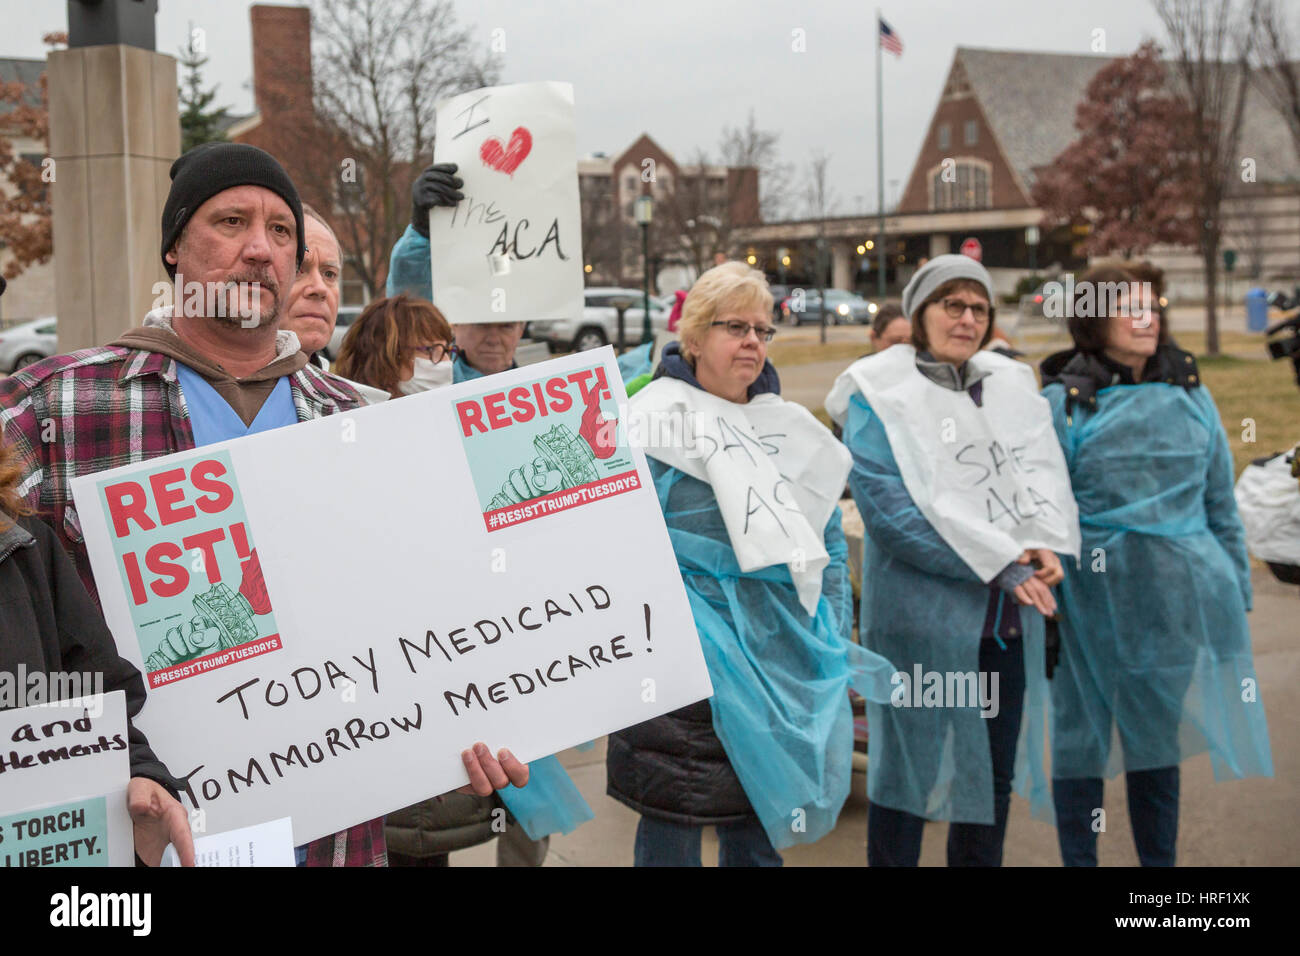 Birmingham, Michigan - With some wearing hospital gowns, people rally to save affordable health care. They were protesting Republicans' plan to repeal Stock Photo